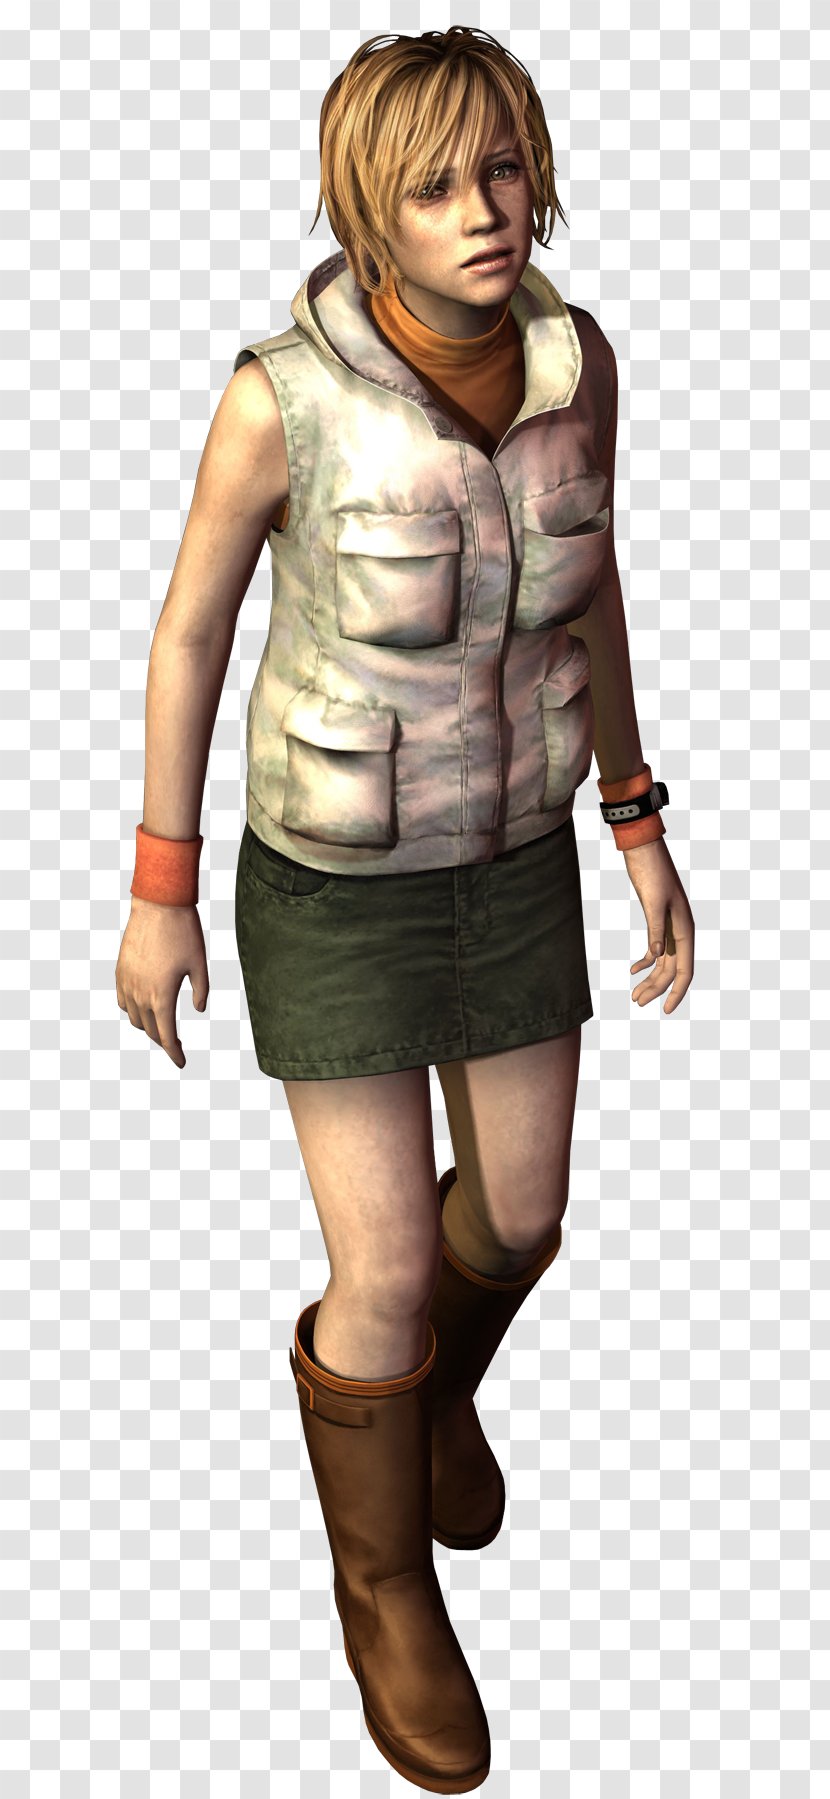 Silent Hill 3 Hill: Shattered Memories Heather Mason Alessa Gillespie - Fictional Character - Hand Transparent PNG